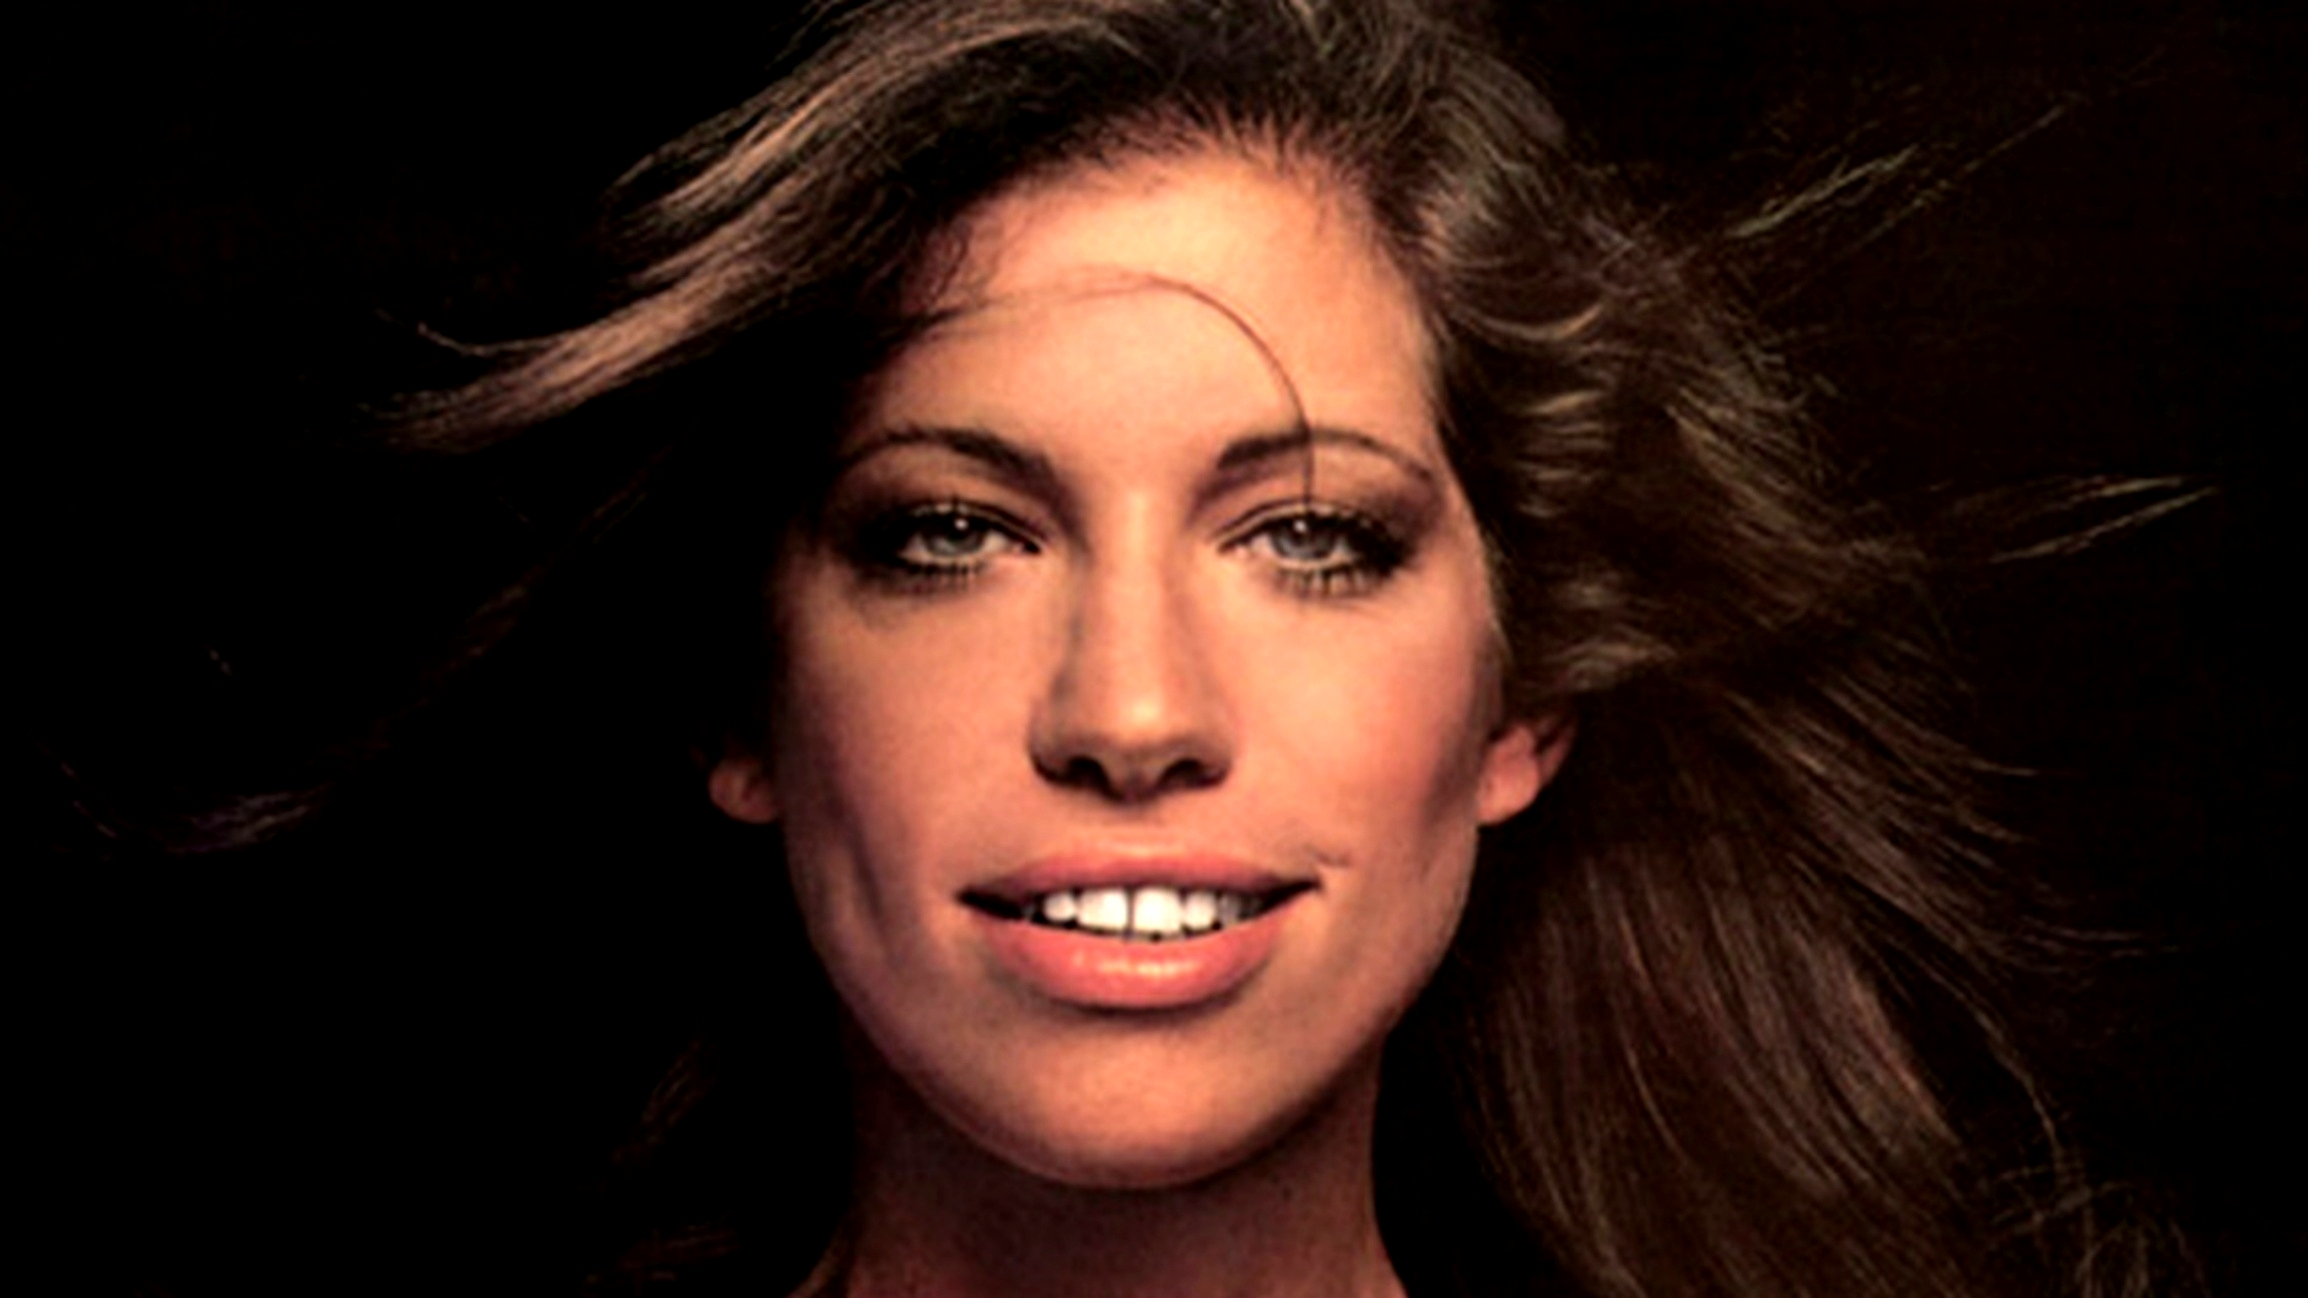 Nobody Does It Better Why Carly Simon Belongs in the Rock & Roll Hall